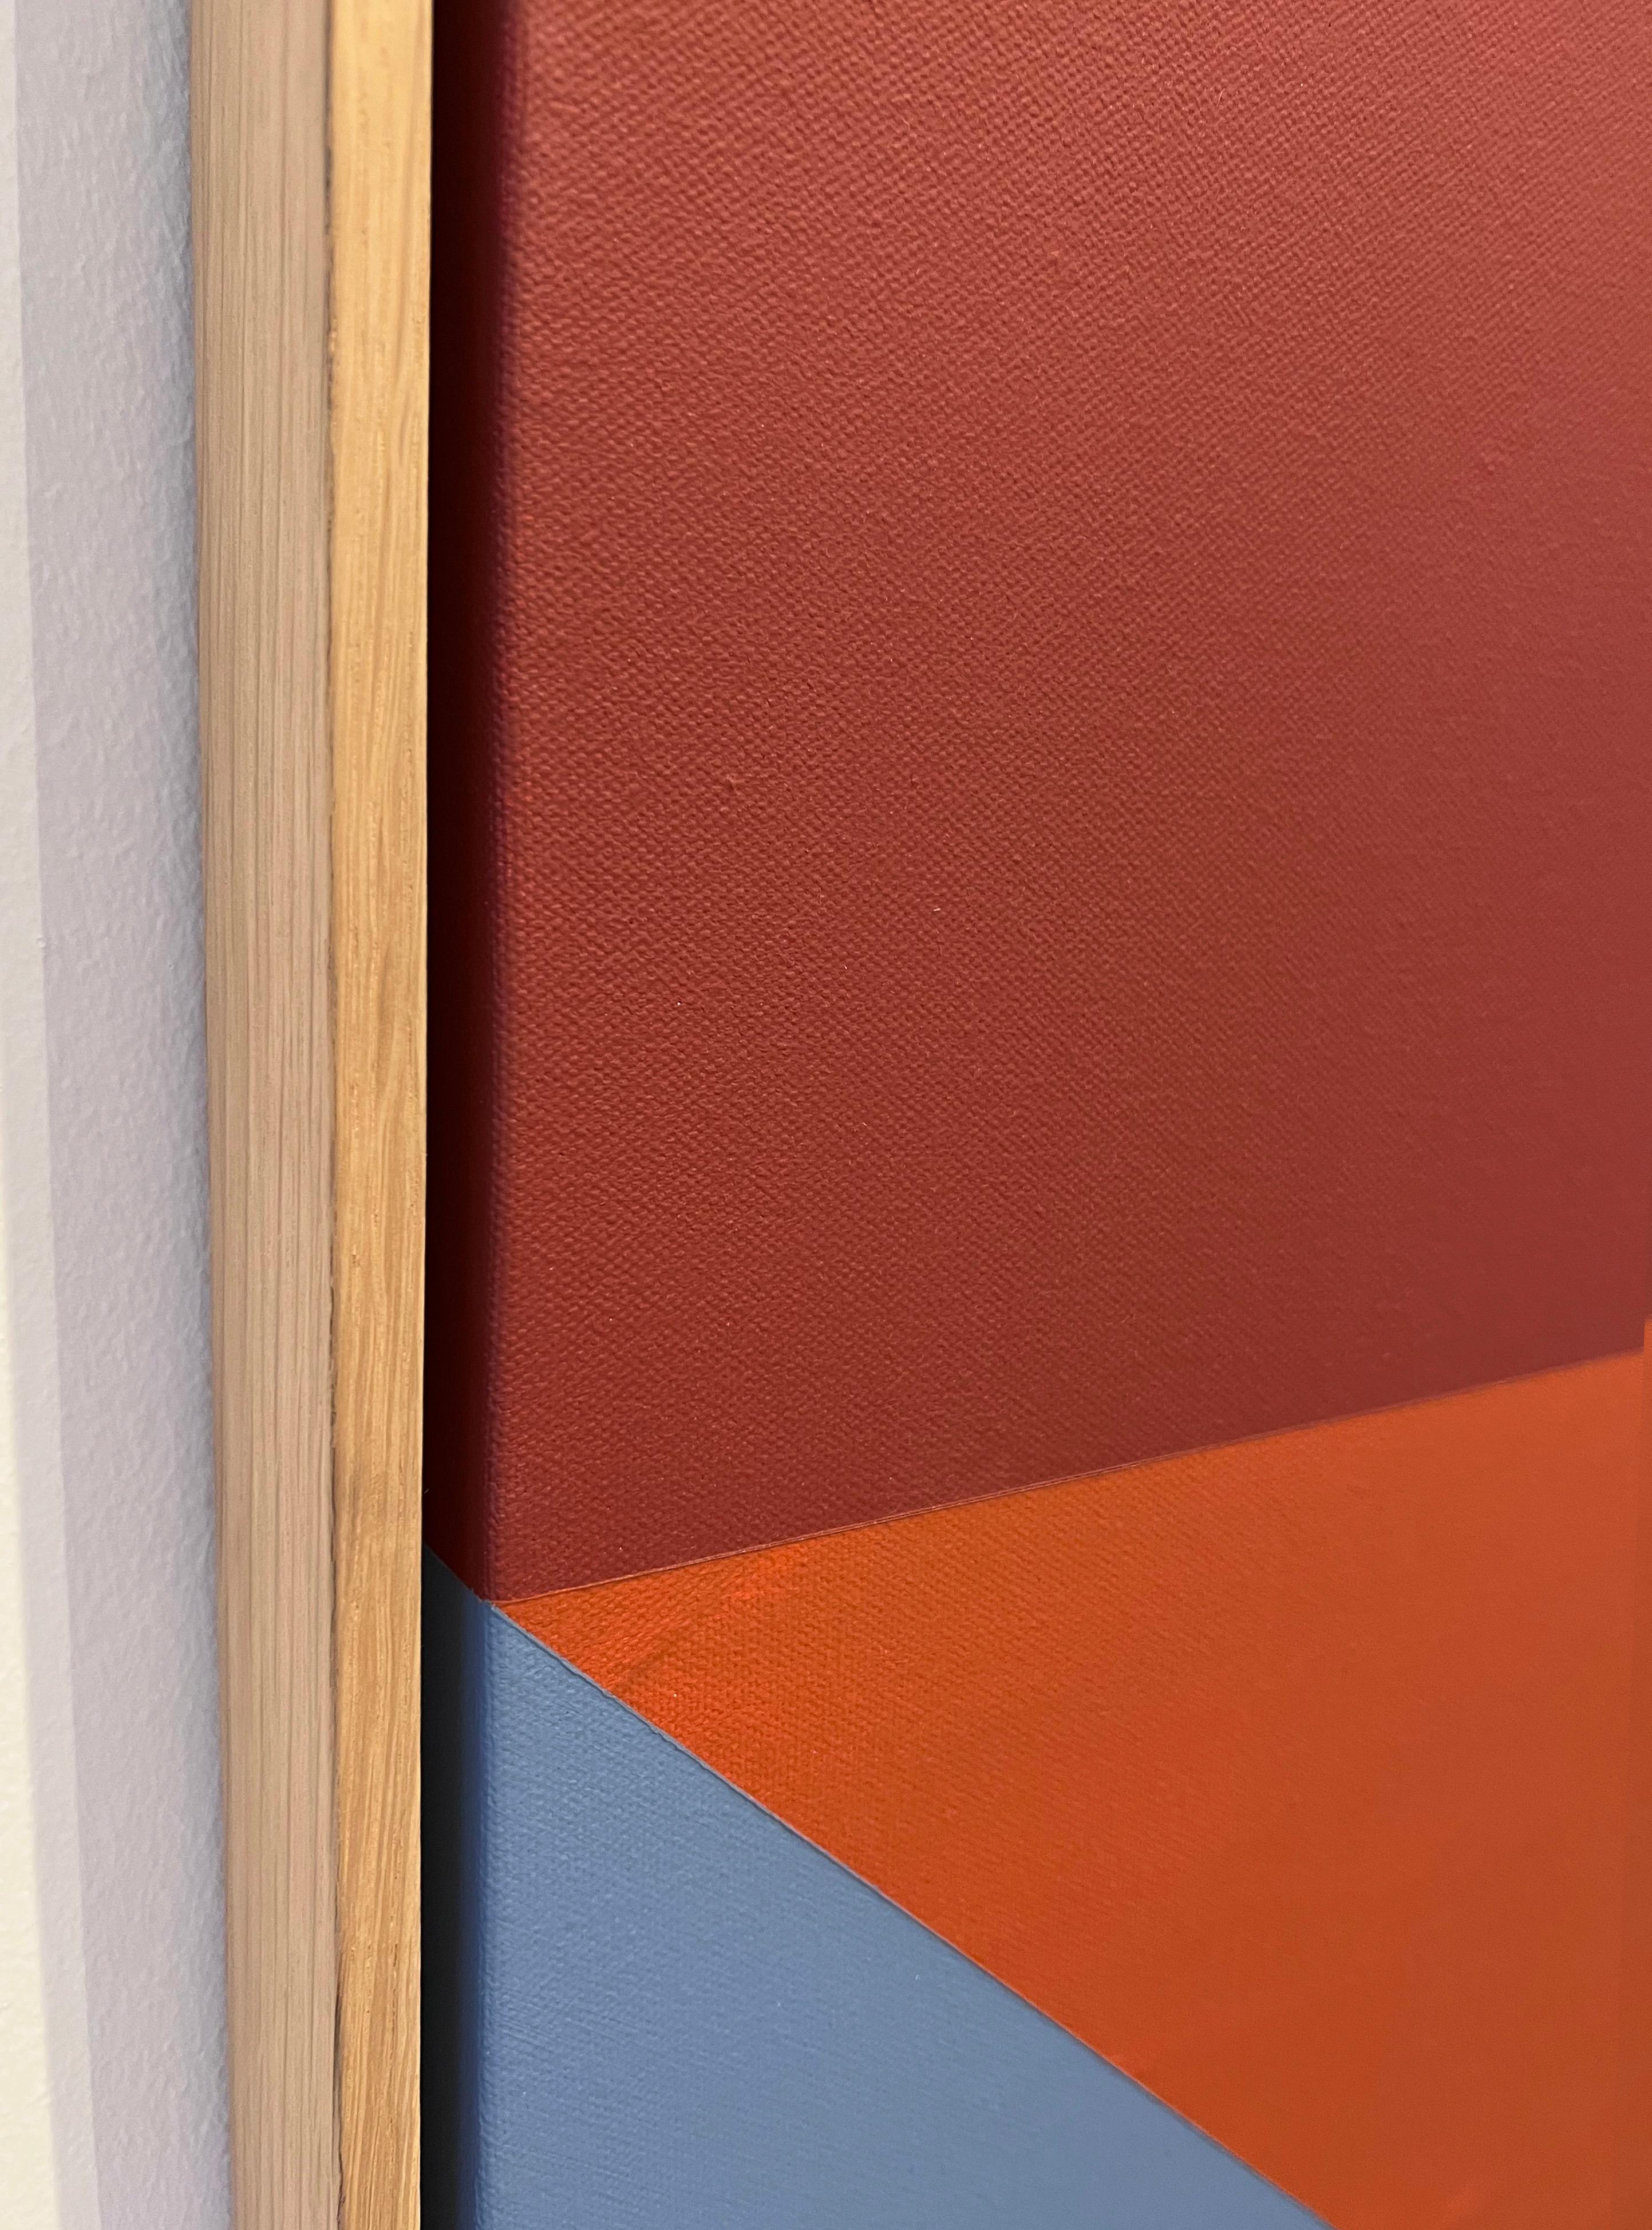 Abstract painting, like architecture, speaks to us about surfaces that interact with each
other, forming a representation of space through optical perspective. But while the
architect or designer projects perspectives in situ, painting can escape